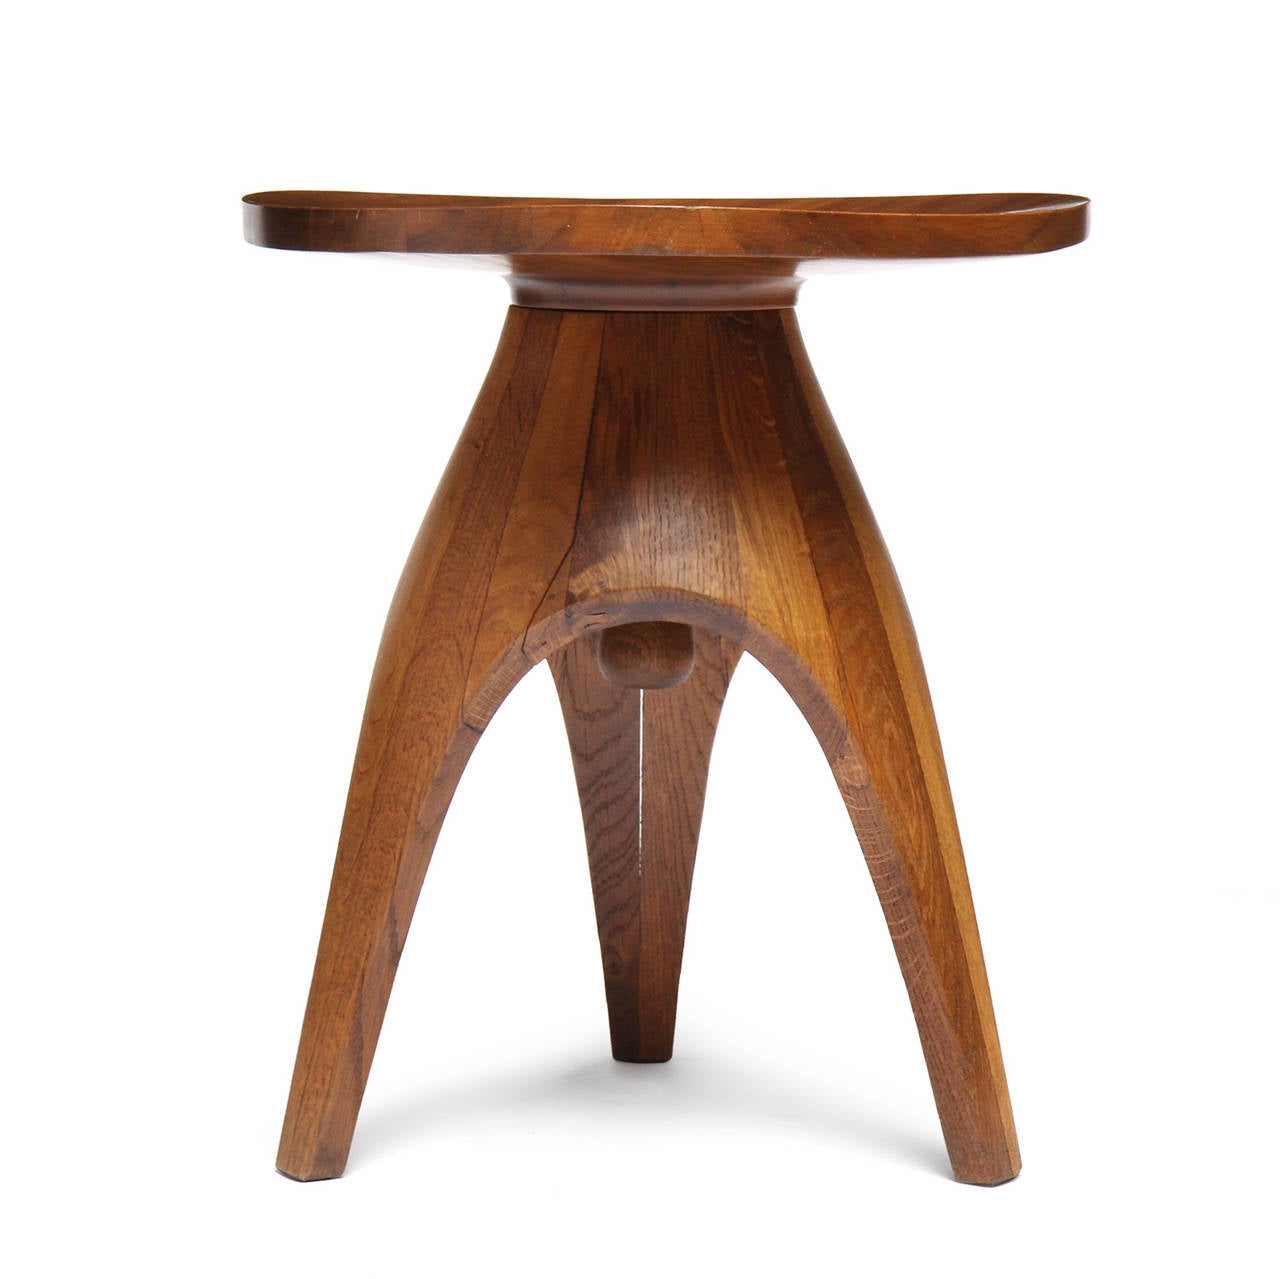 A superbly crafted and sculptural swivel stool having a rounded triangular solid single board teak seat perched on a staved oak three-leg base.